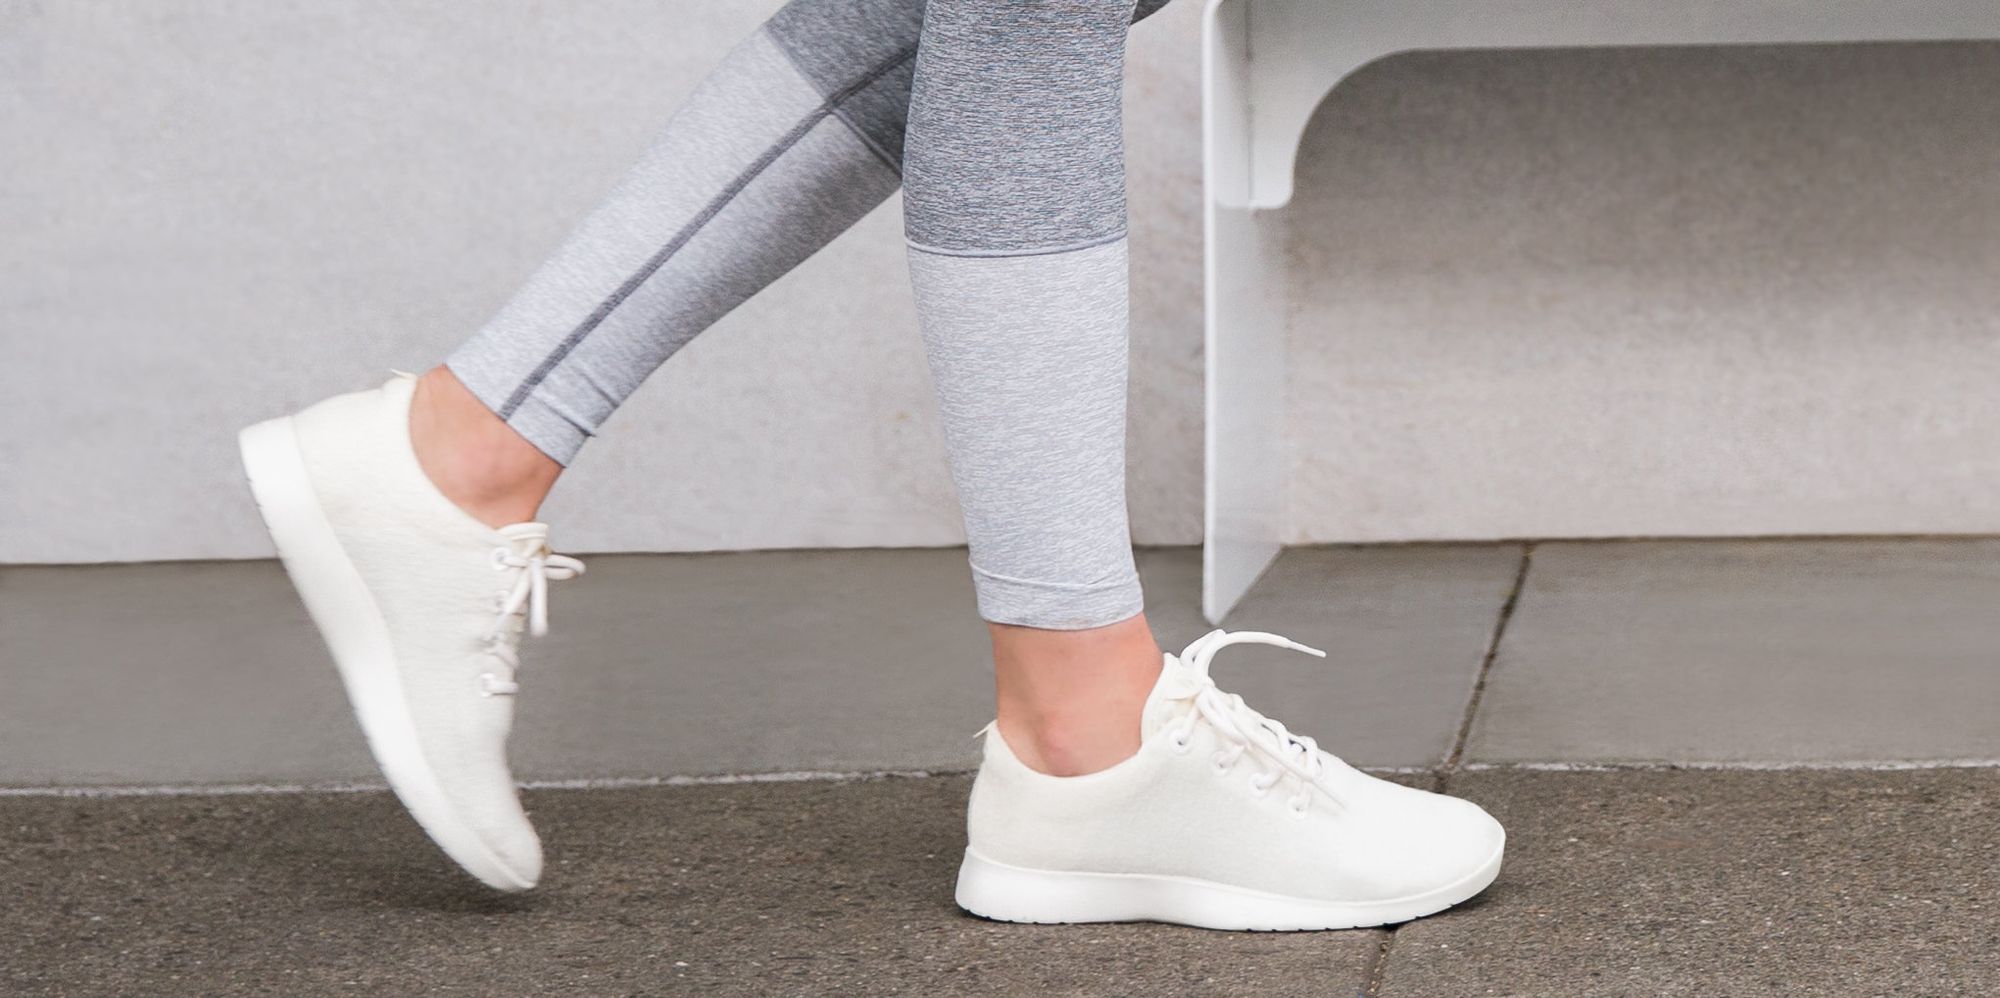 Allbirds Sneakers Is A Likely Bet To Replace Your Converse | The ...